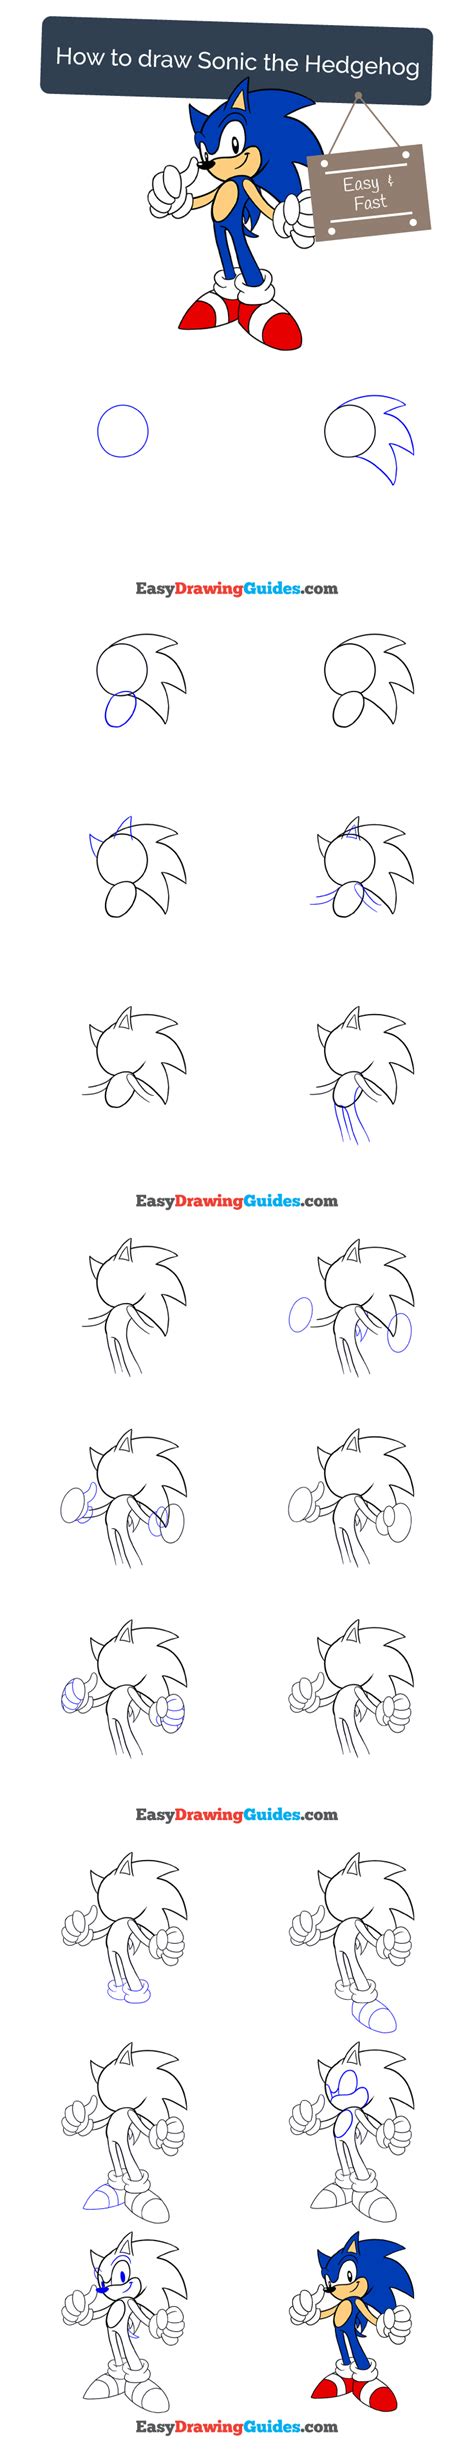 How To Draw Sonic The Hedgehog In A Few Easy Steps How To Draw Sonic